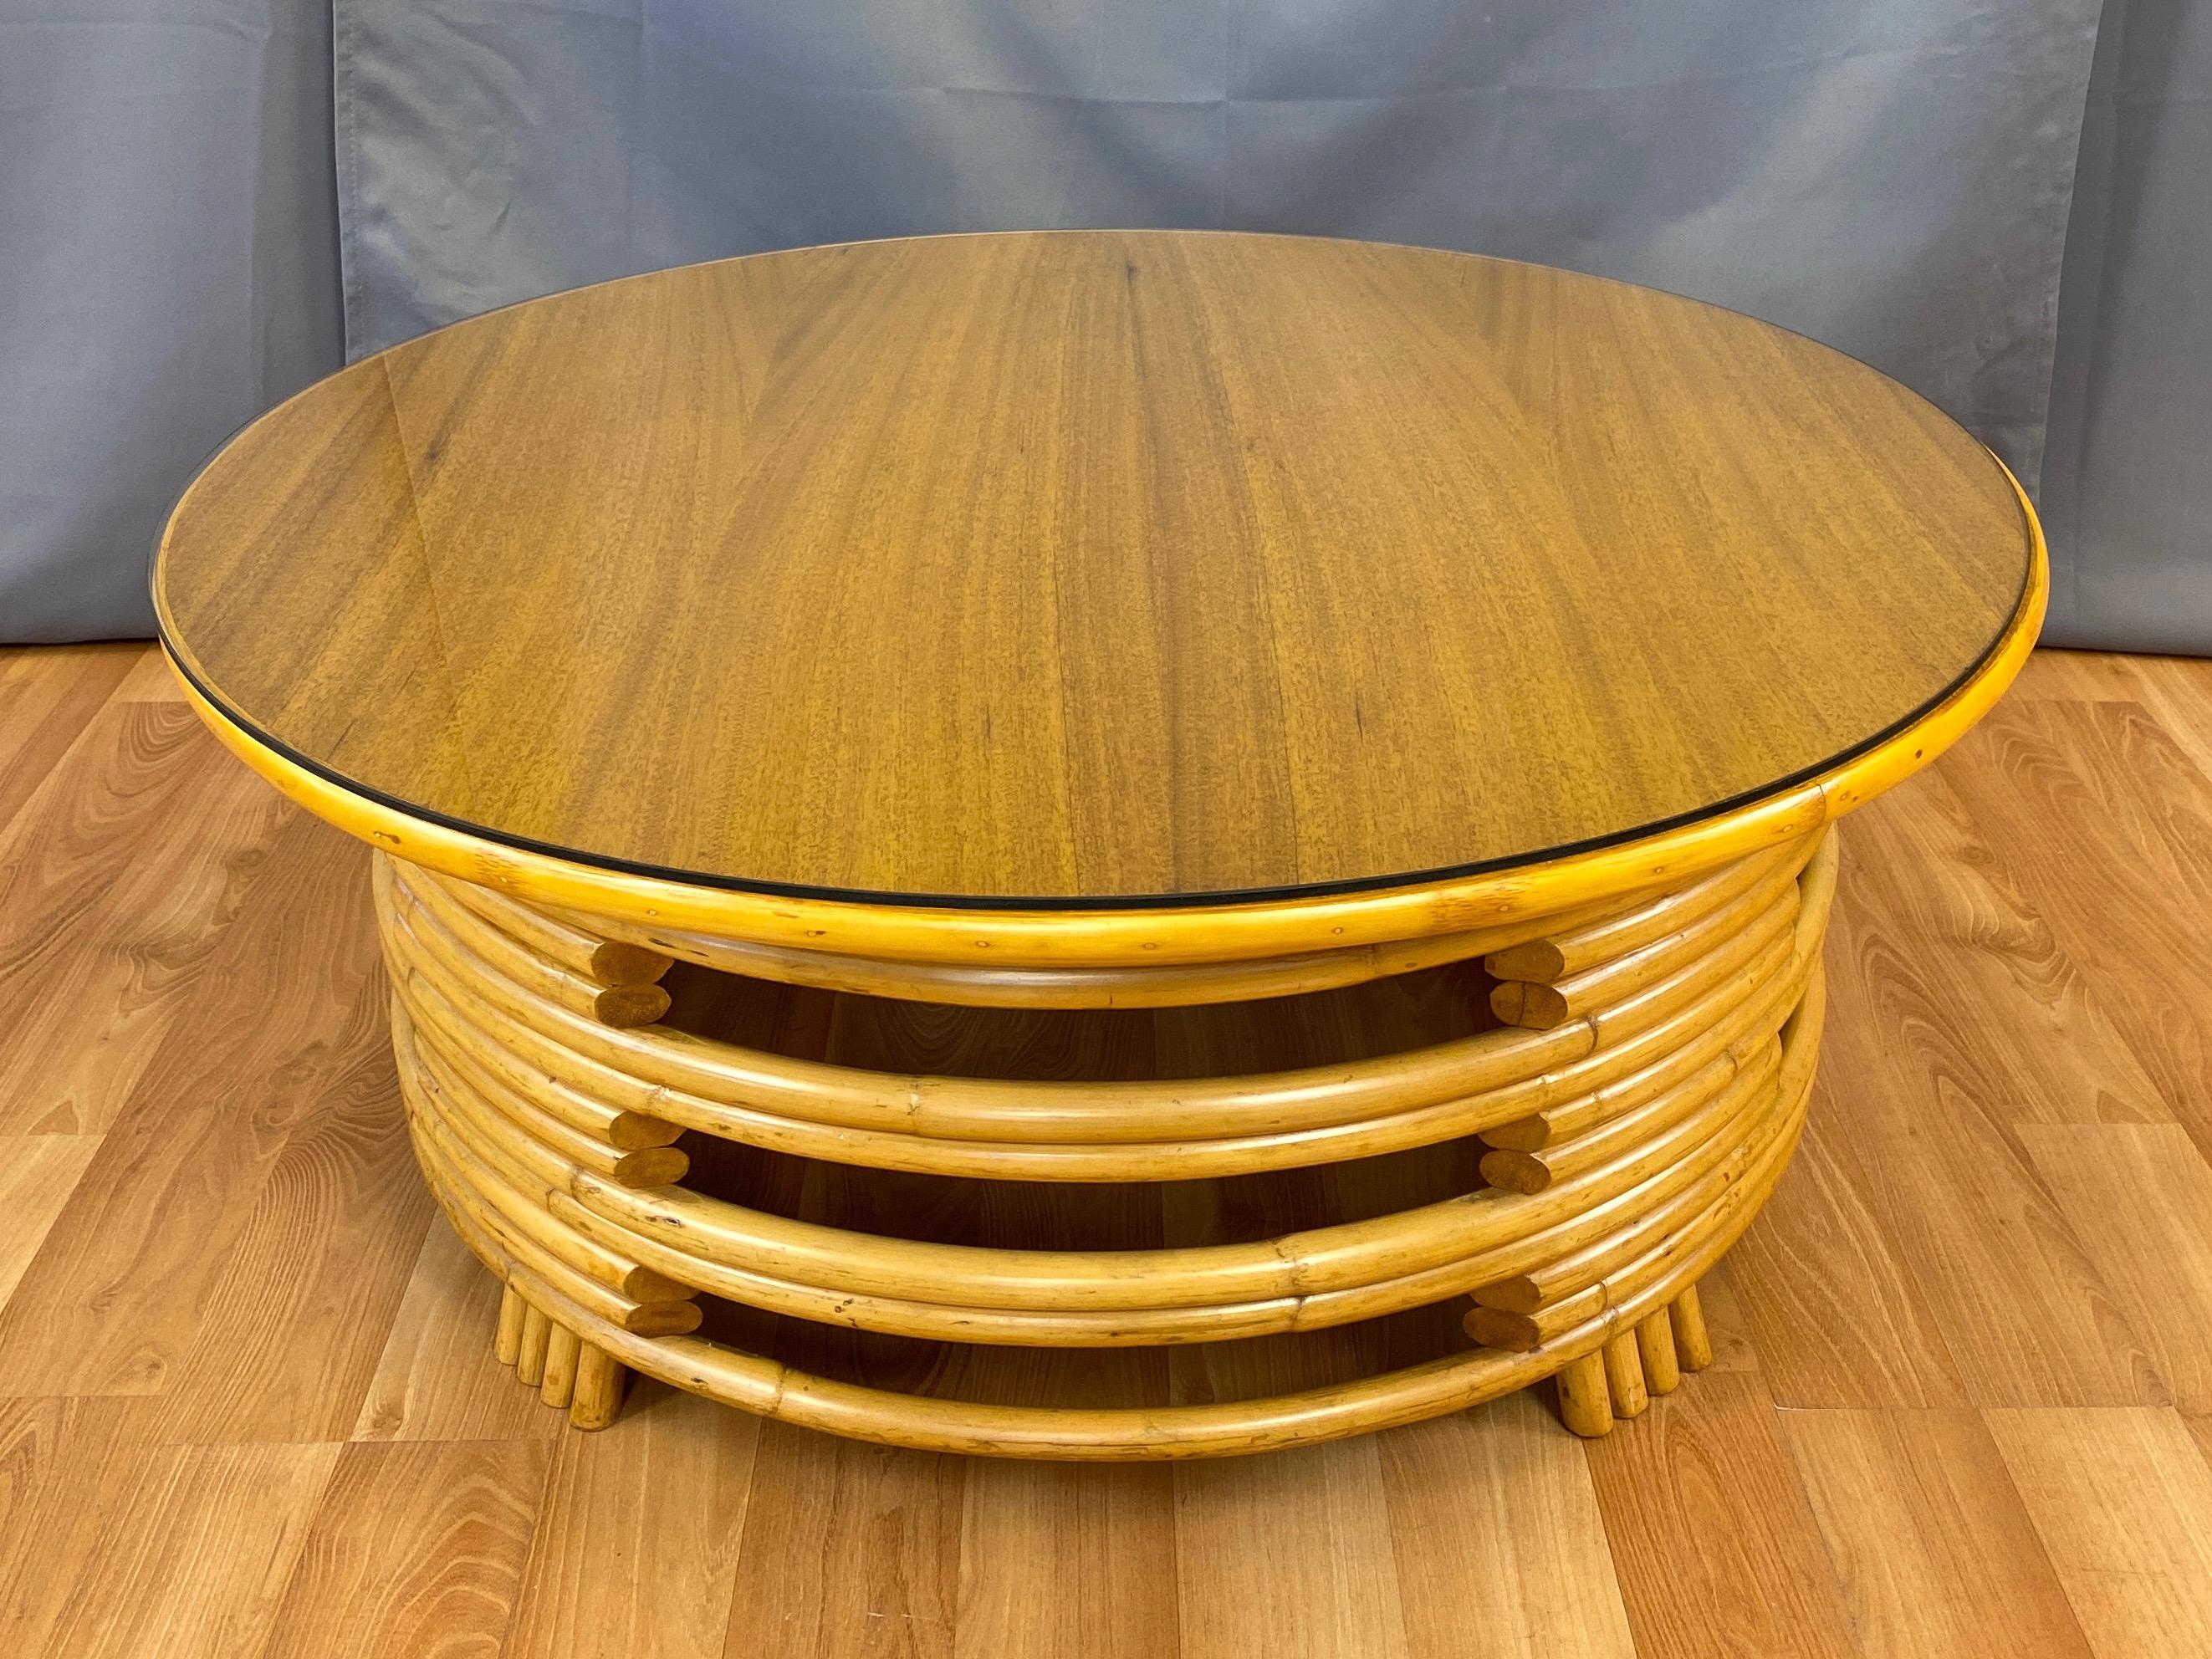 A very handsome mid-century Paul Frankl-style rattan and mahogany round coffee table by Tropical Sun Co. of Pasadena, California.

Expertly-crafted bent rattan stacked with alternating openings that give the curvaceous form a substantial yet open